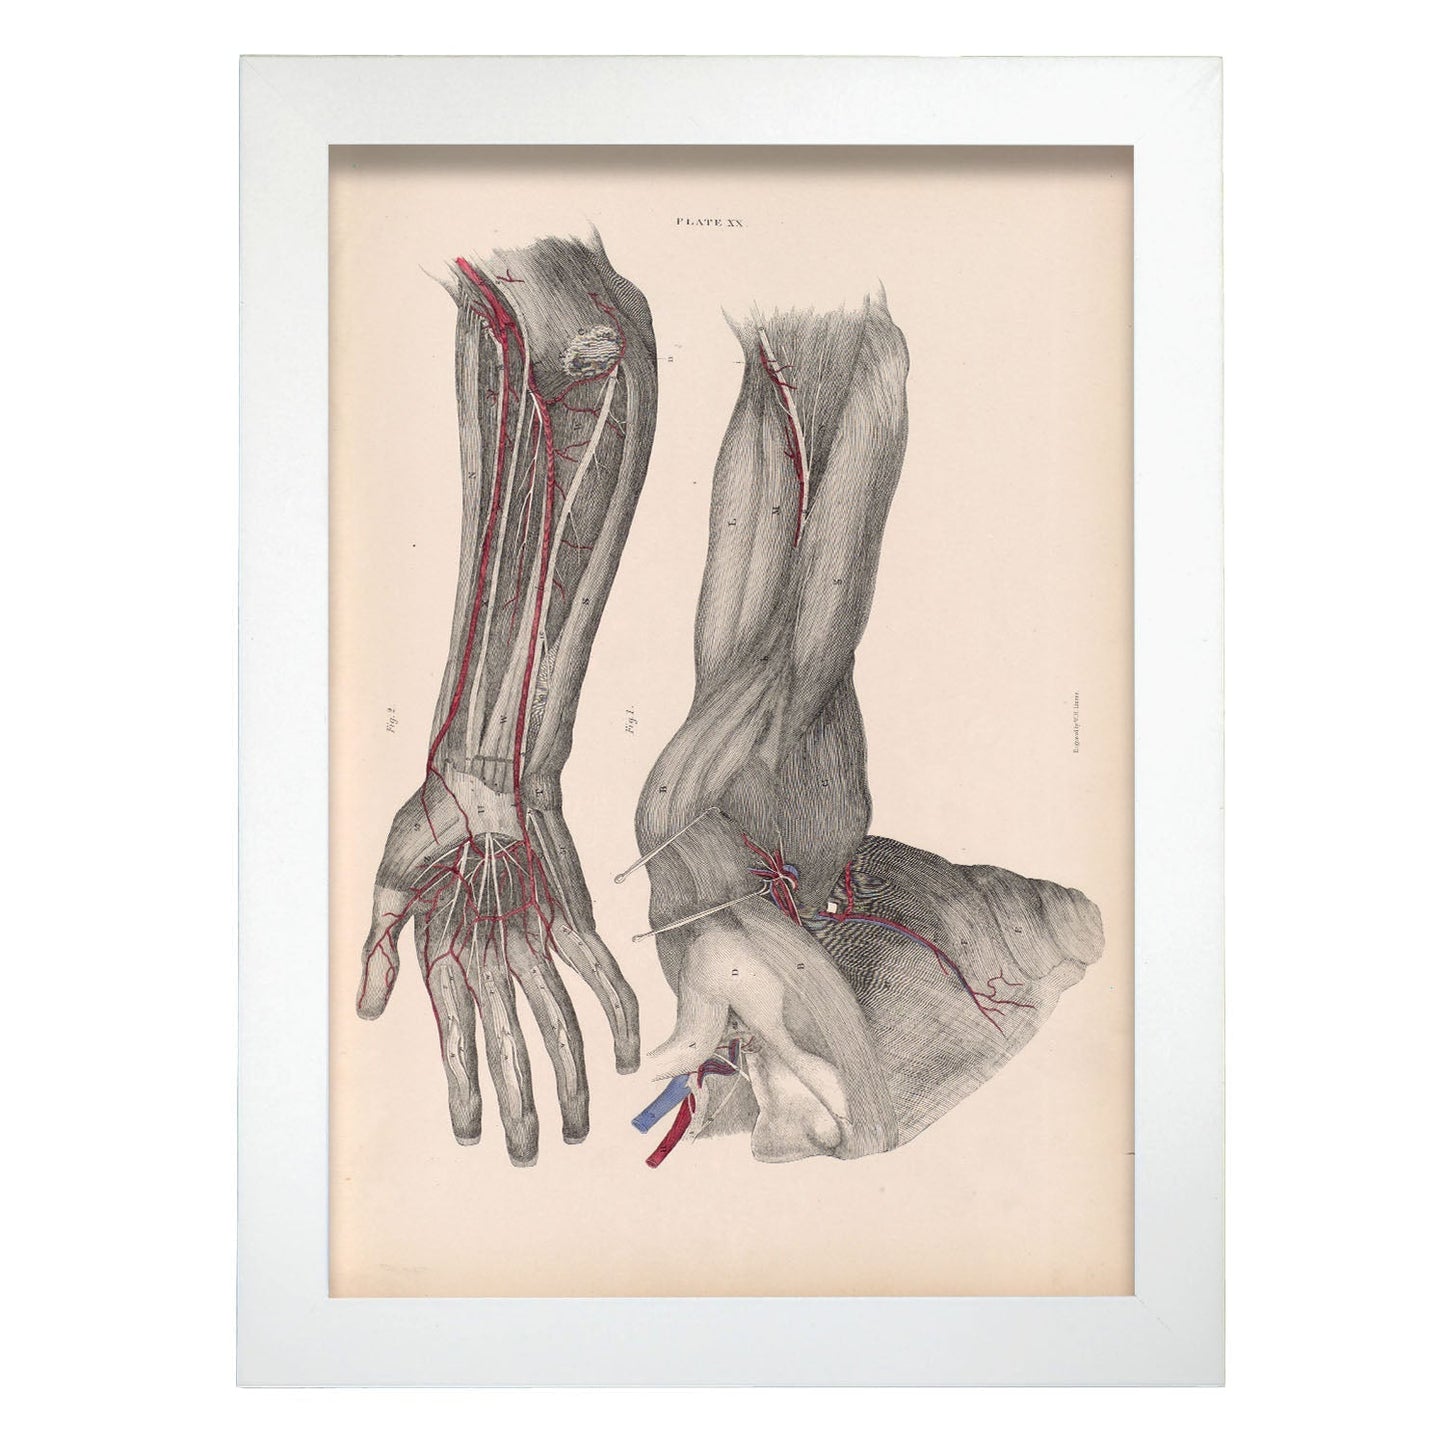 Dissection of the arm and hand-Artwork-Nacnic-A4-Marco Blanco-Nacnic Estudio SL